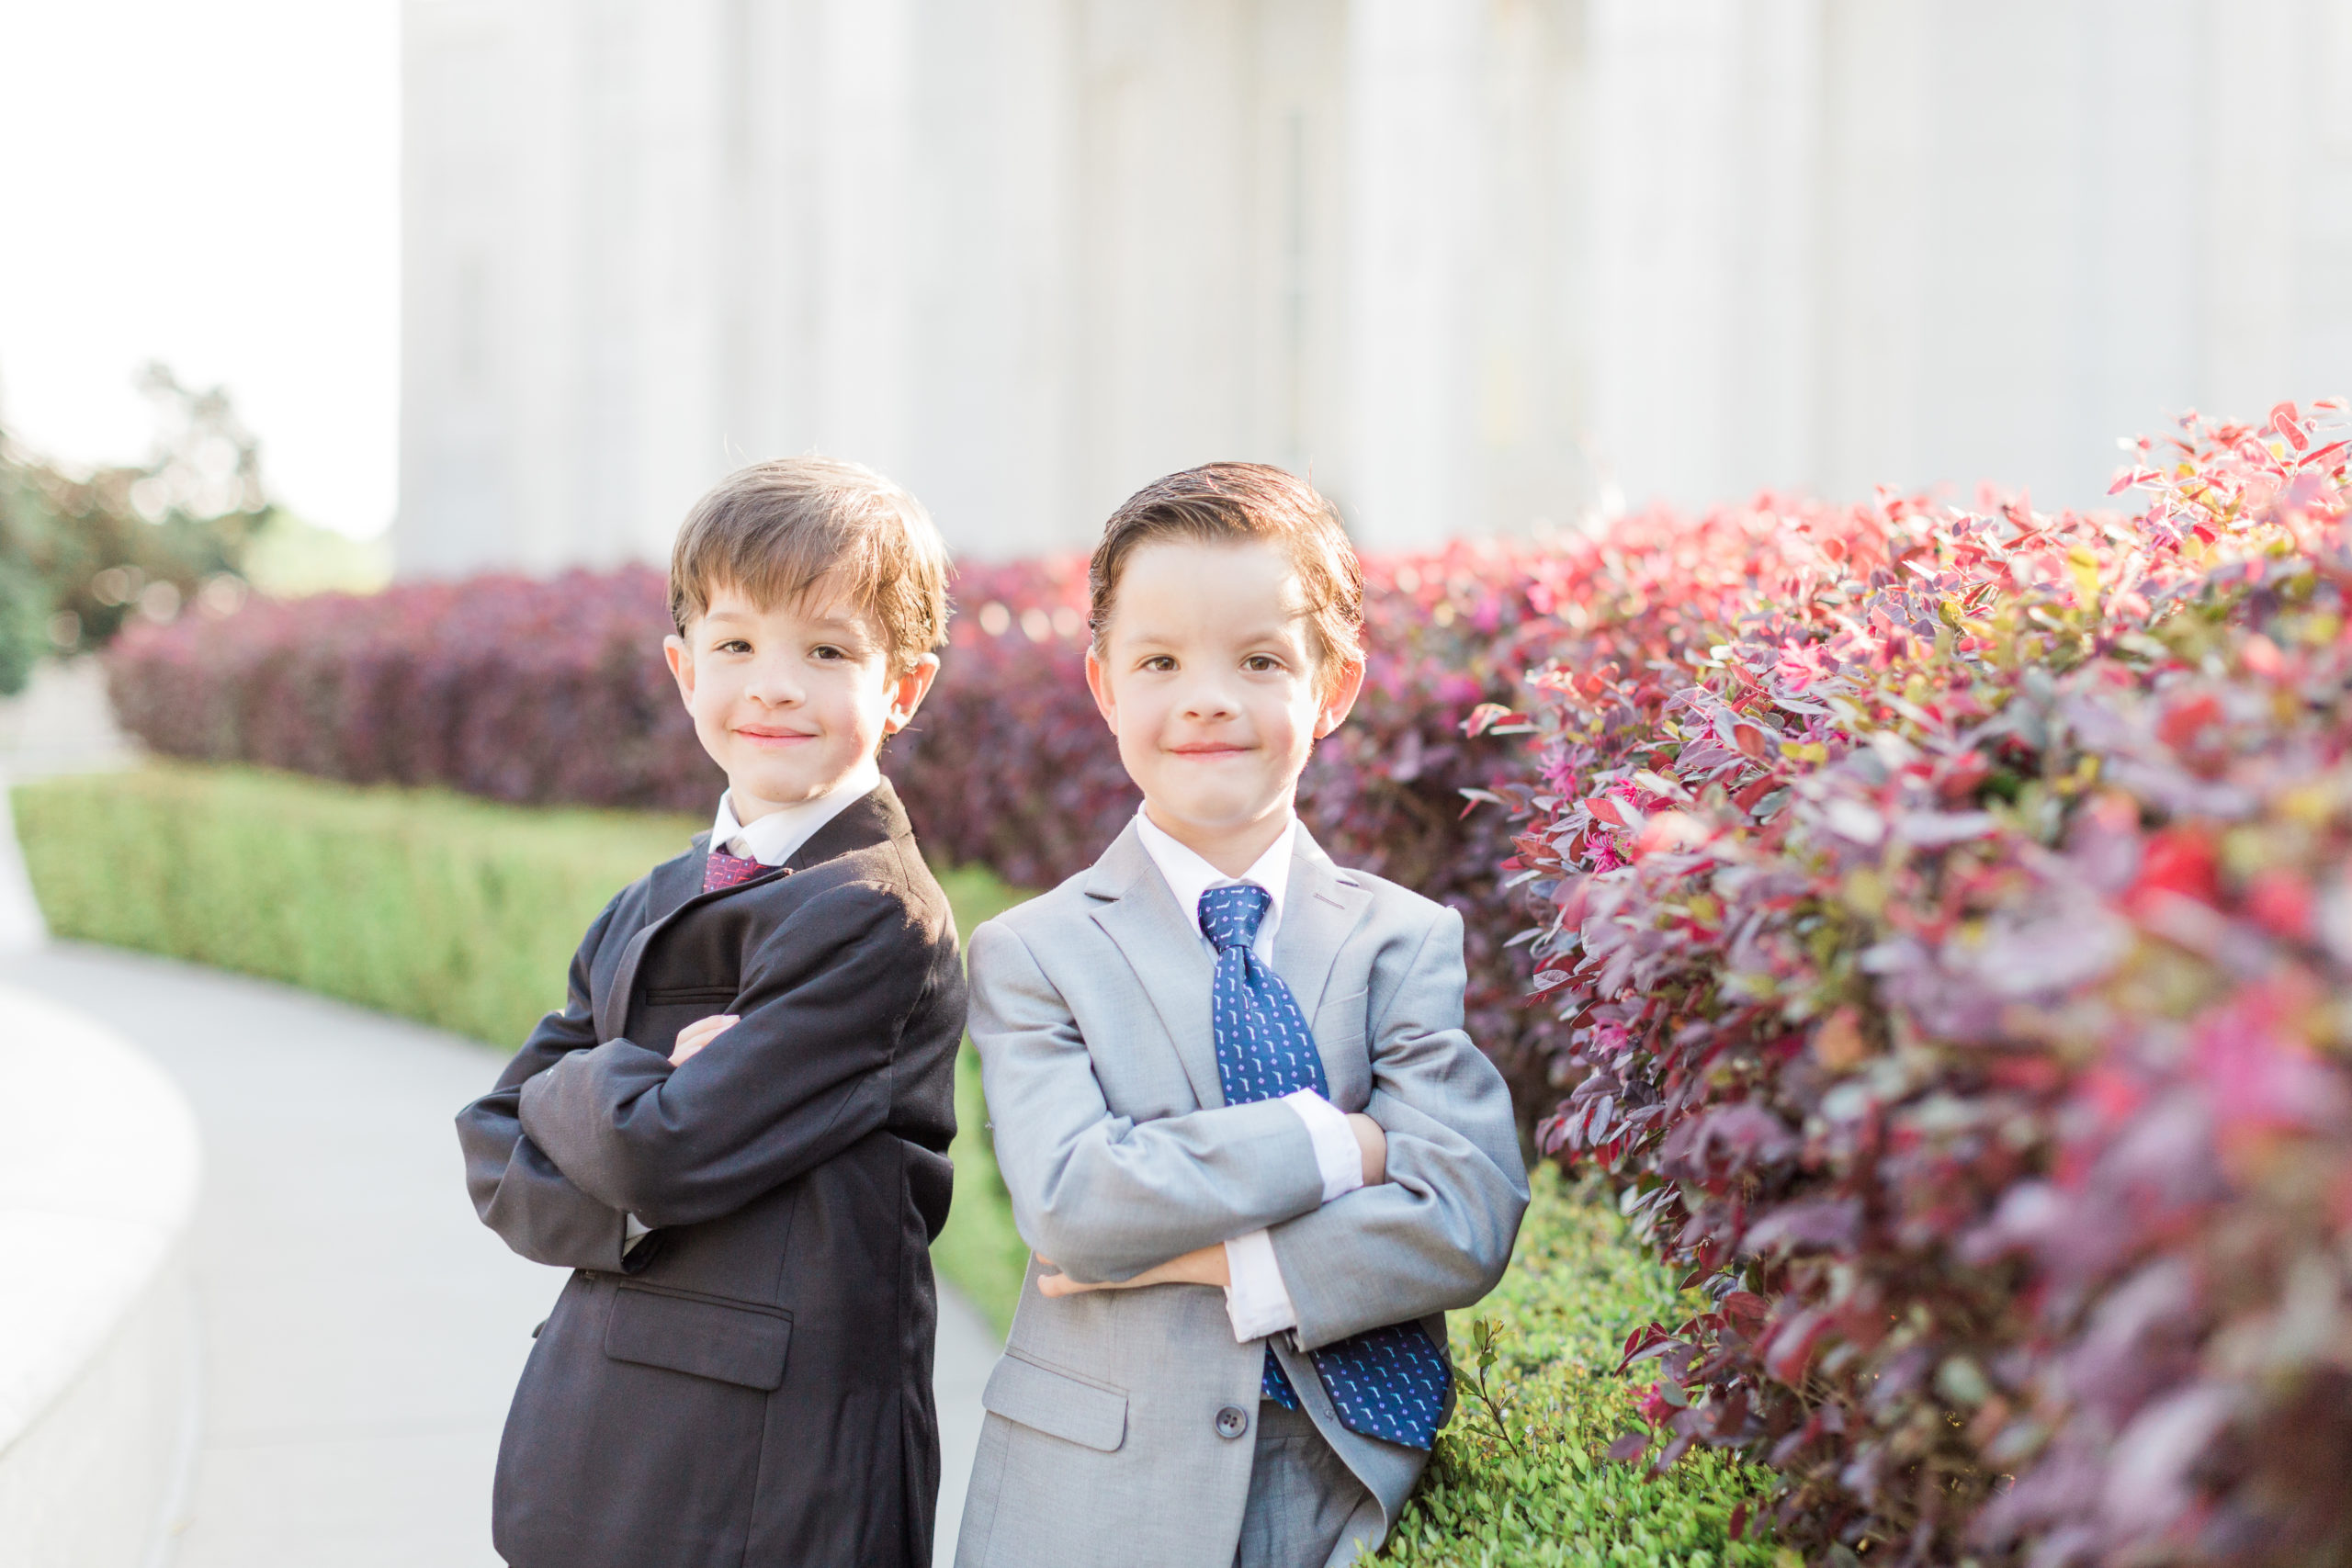 Two young men fold their arms as they pose for photos